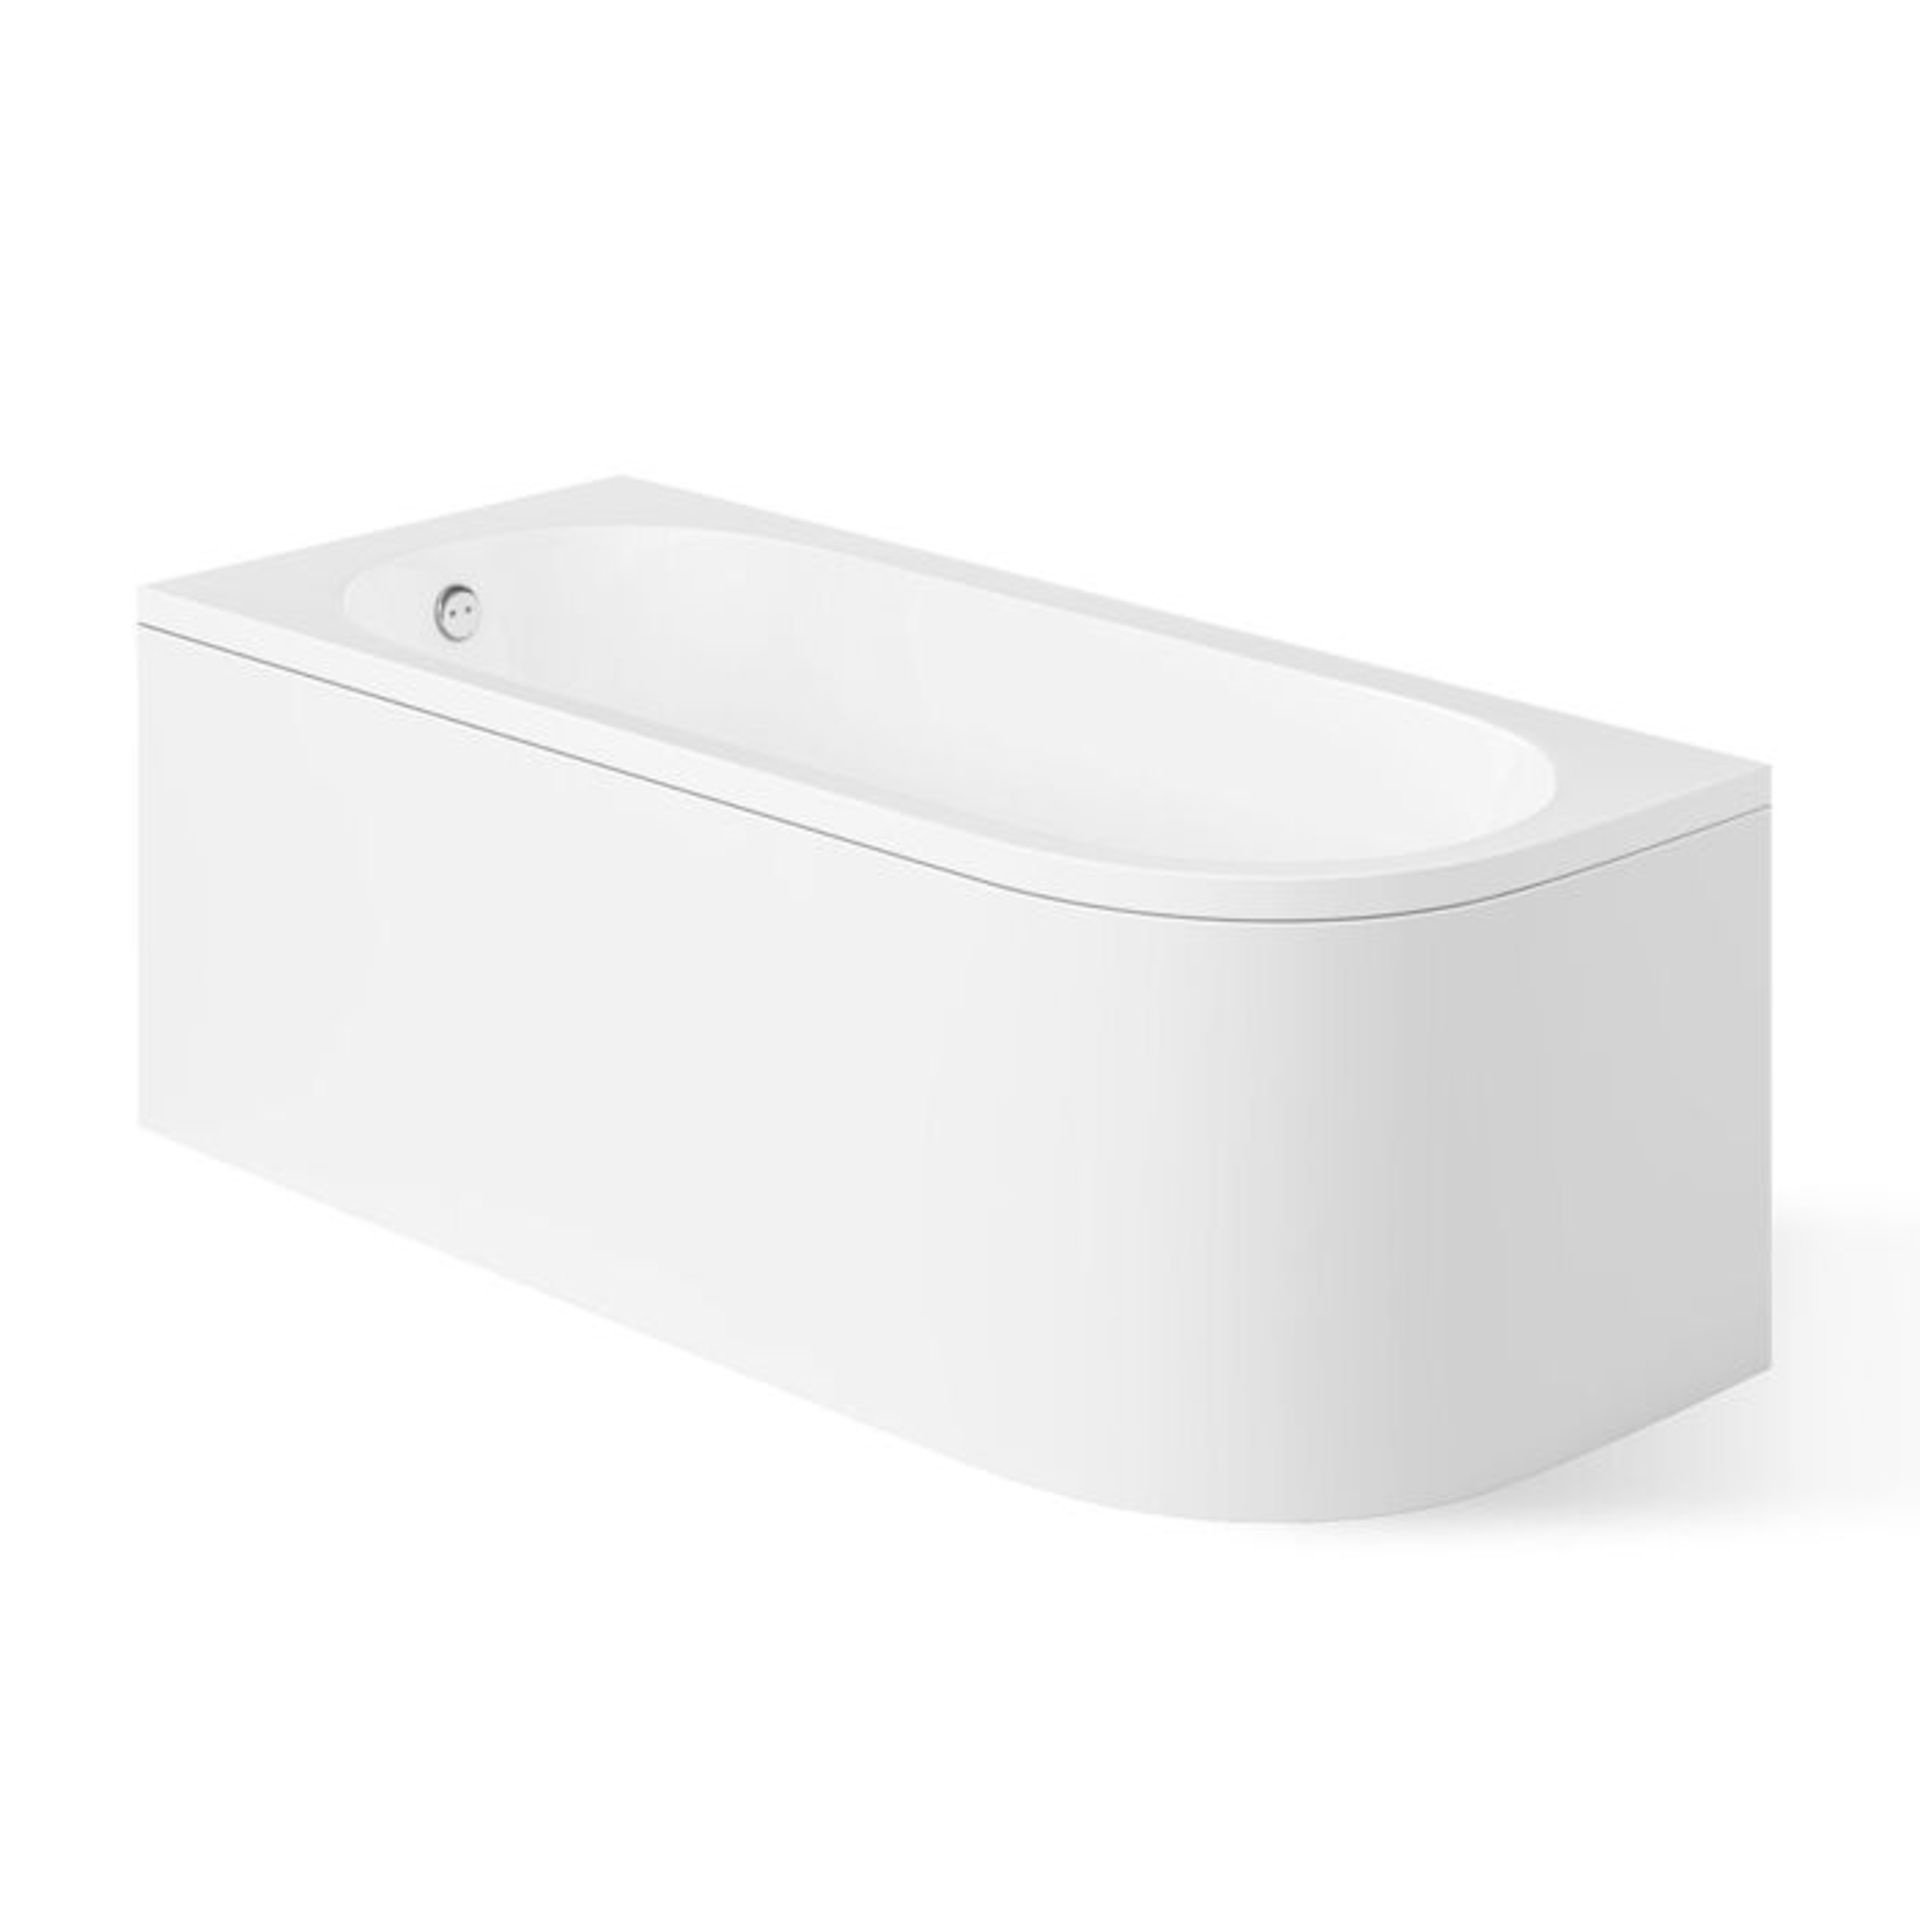 (AA35) 1700mm Denver Corner Back to Wall Bath- Left Hand. RRP £499.99. Double ended feature ... - Image 5 of 6